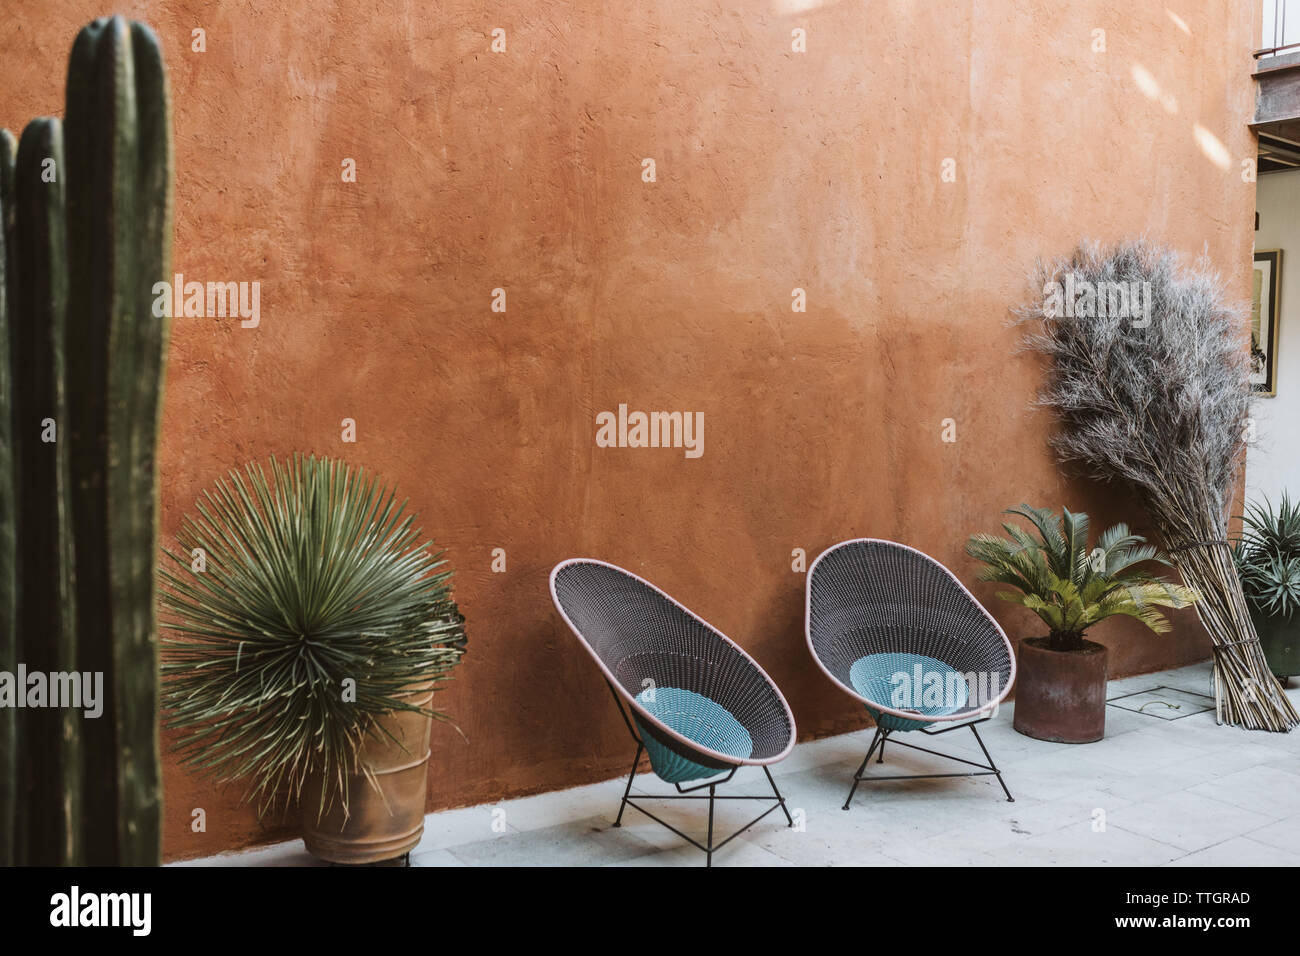 outdoor patio space with two empty chairs and potted cacti Stock Photo